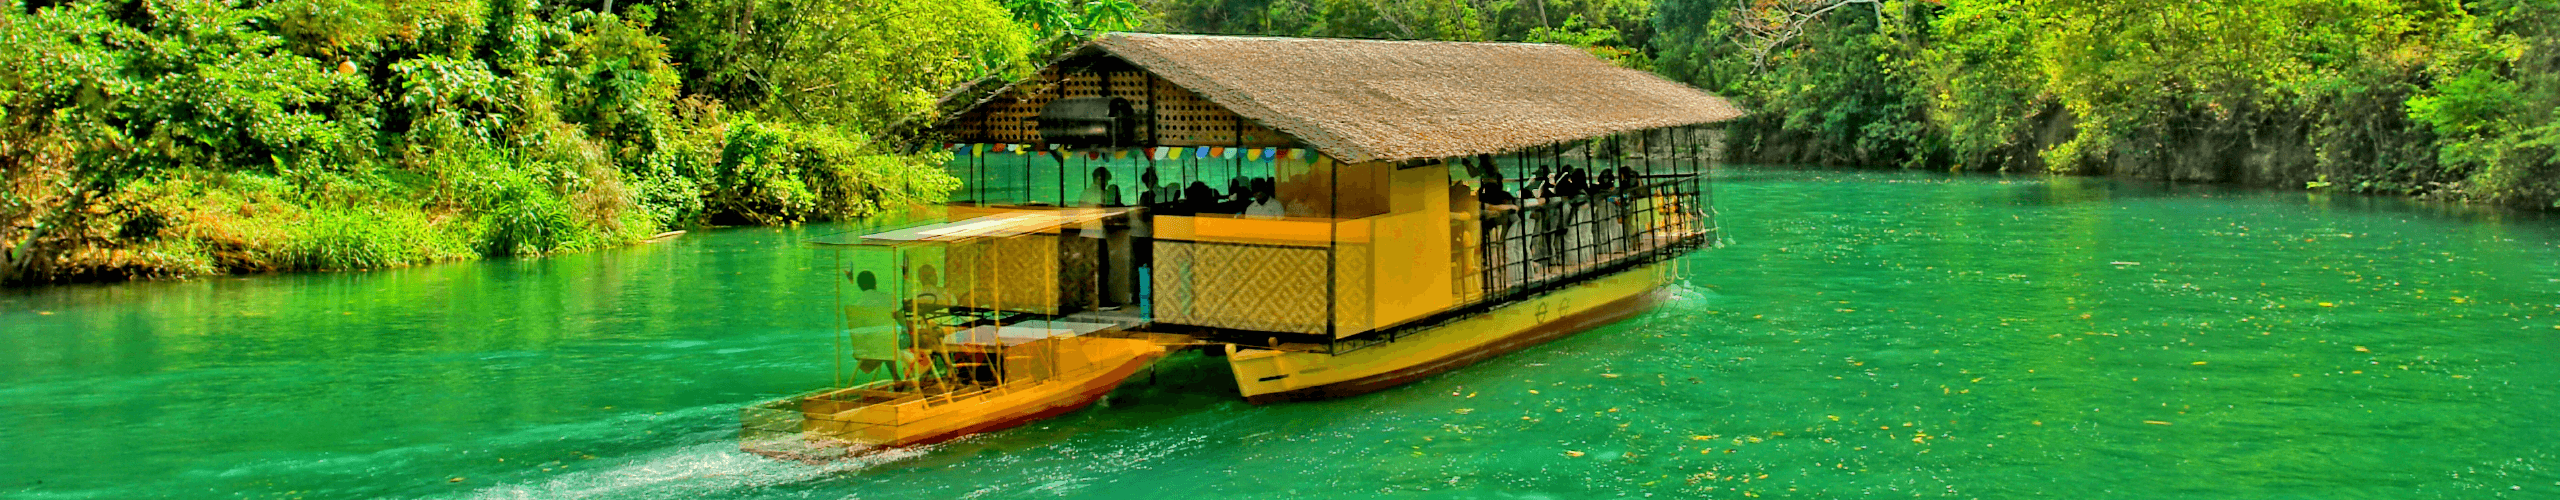 Dining boat on Philippines river